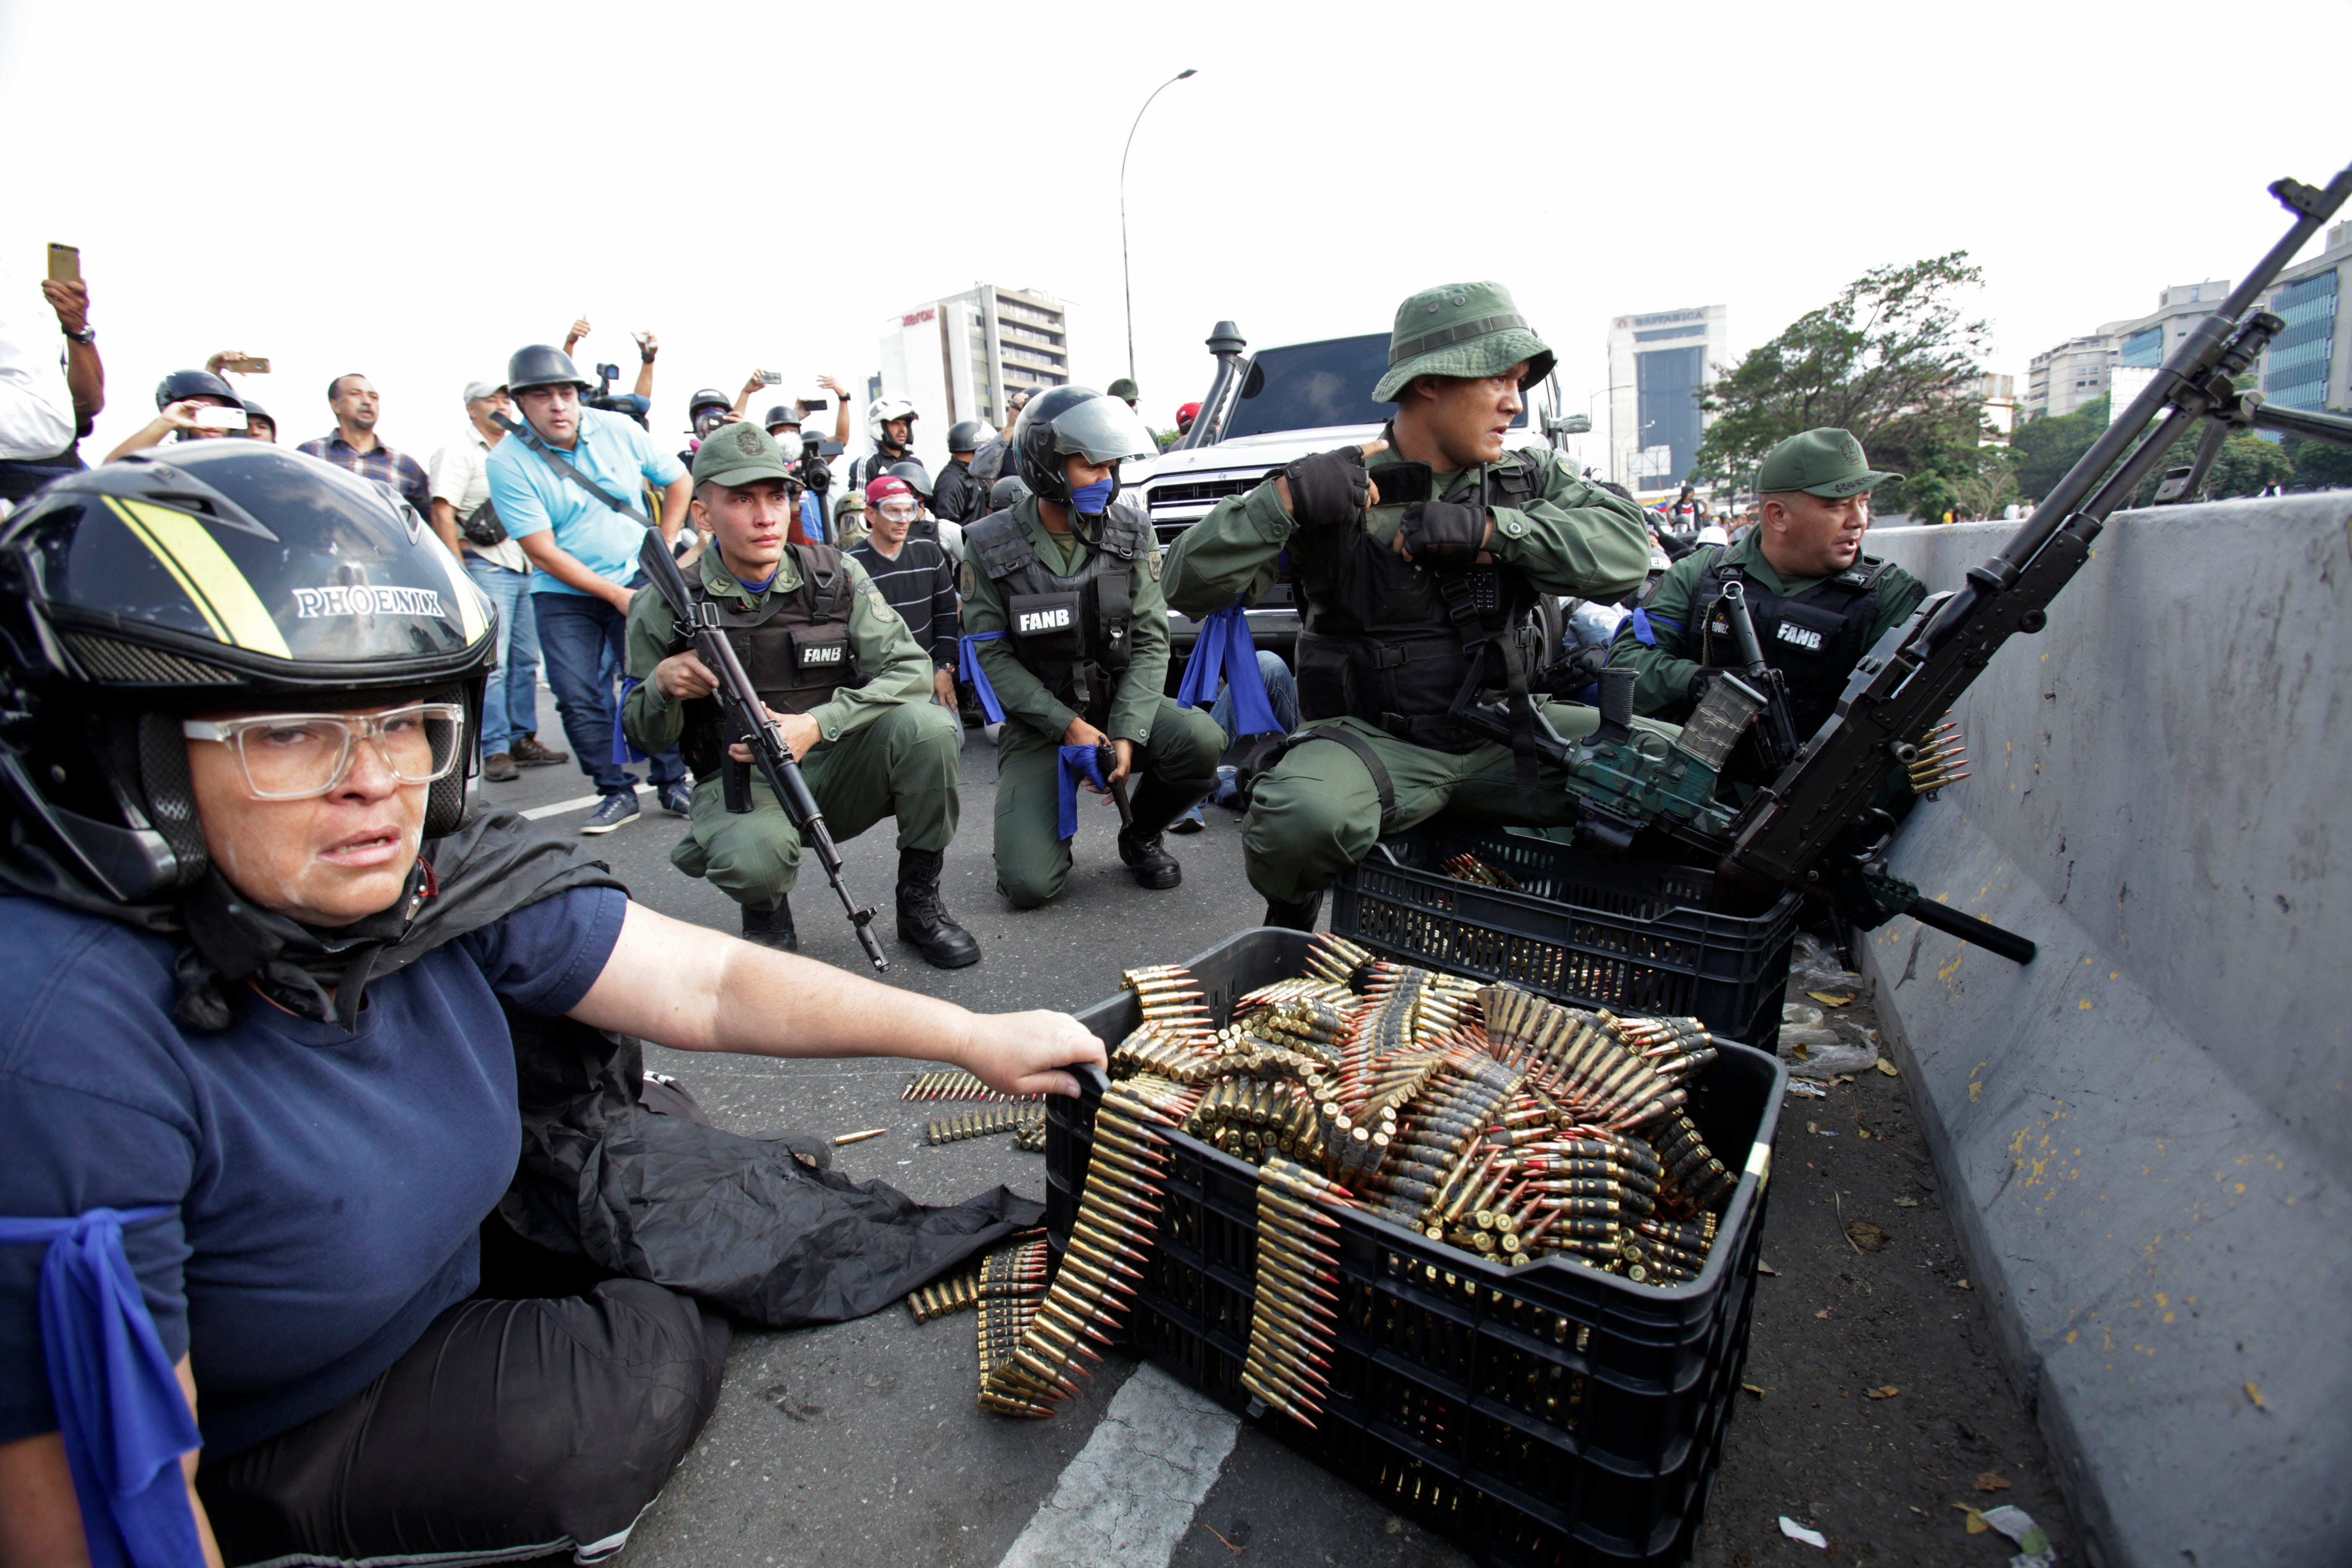 An anti-government protester sits by ammunition being used by rebel troops rising up against the government of Venezuela ' s President Nicolas Maduro in Caracas, Venezuela, April 30, 2019.